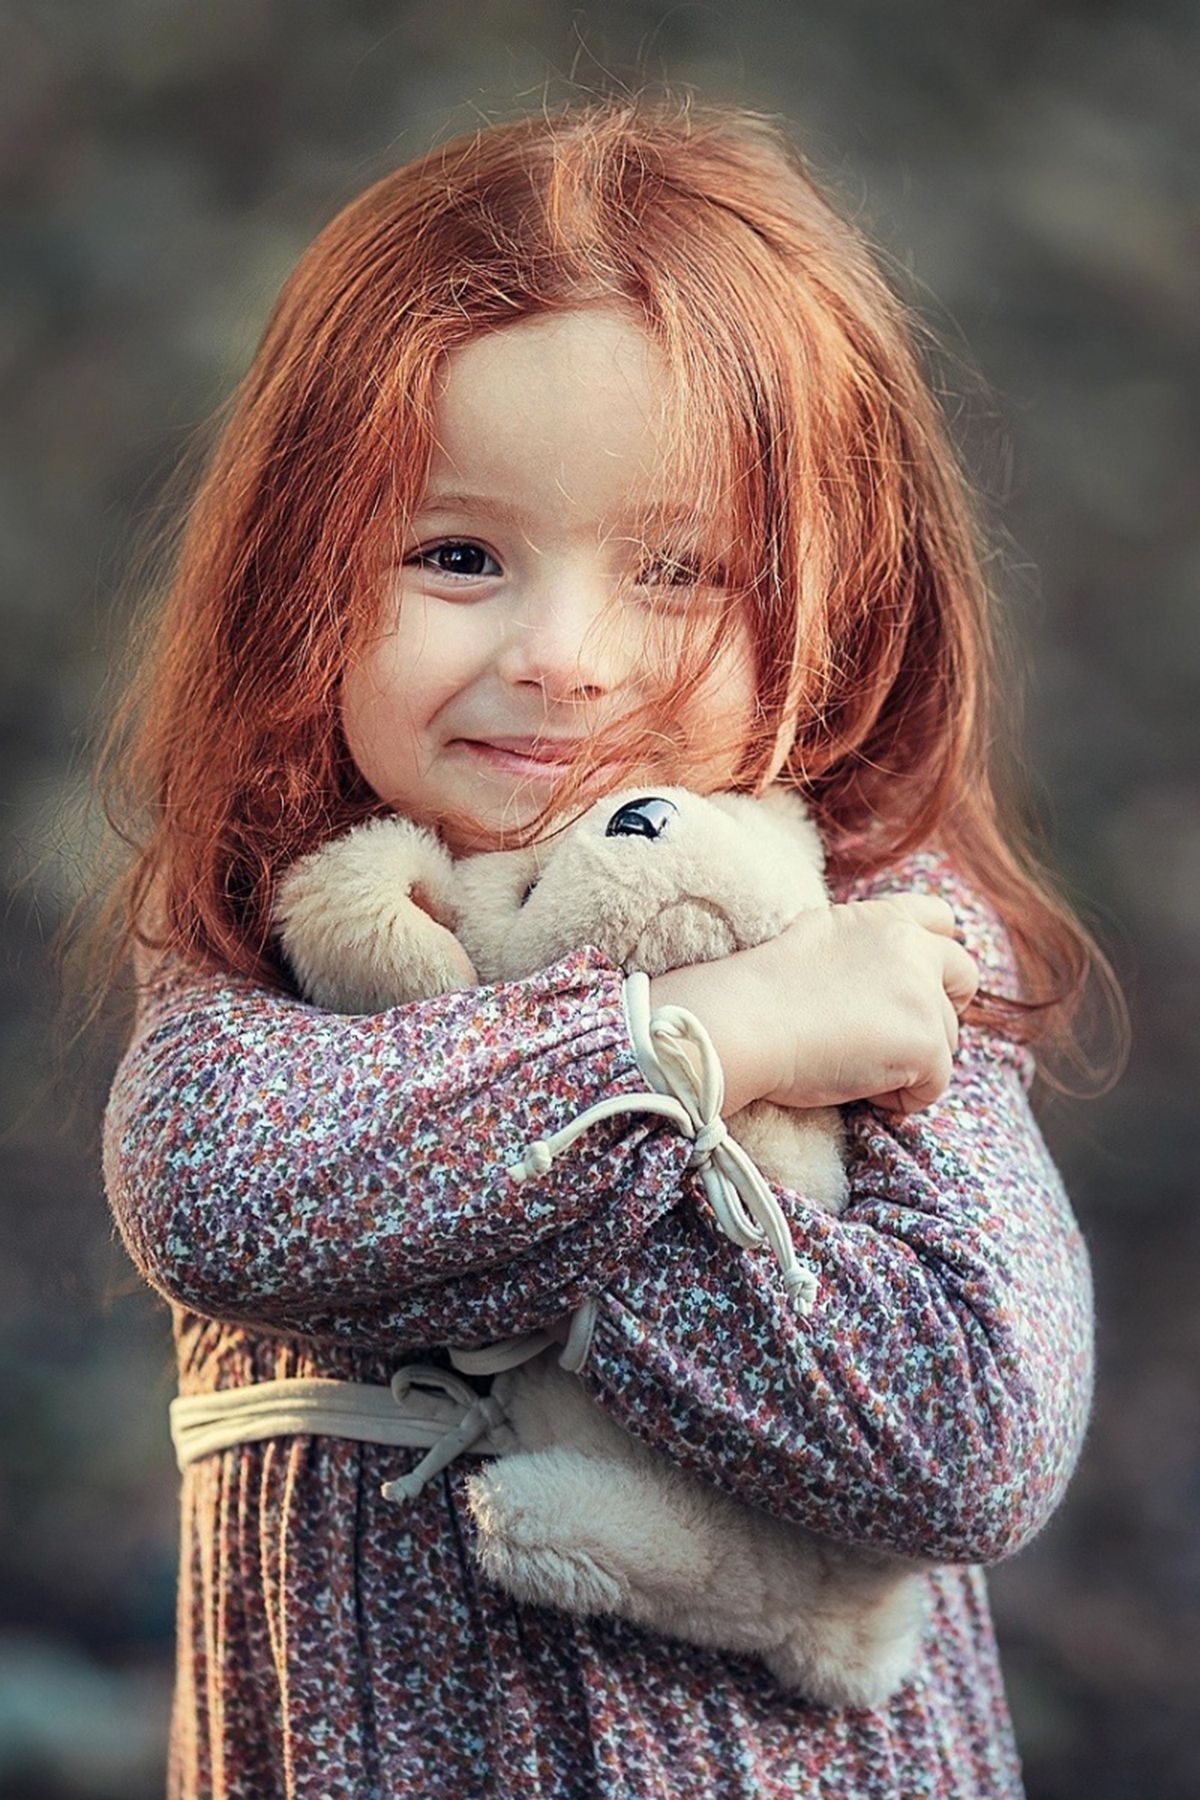 Little cute girl hug to small teddy nice picture mobile wallpaper